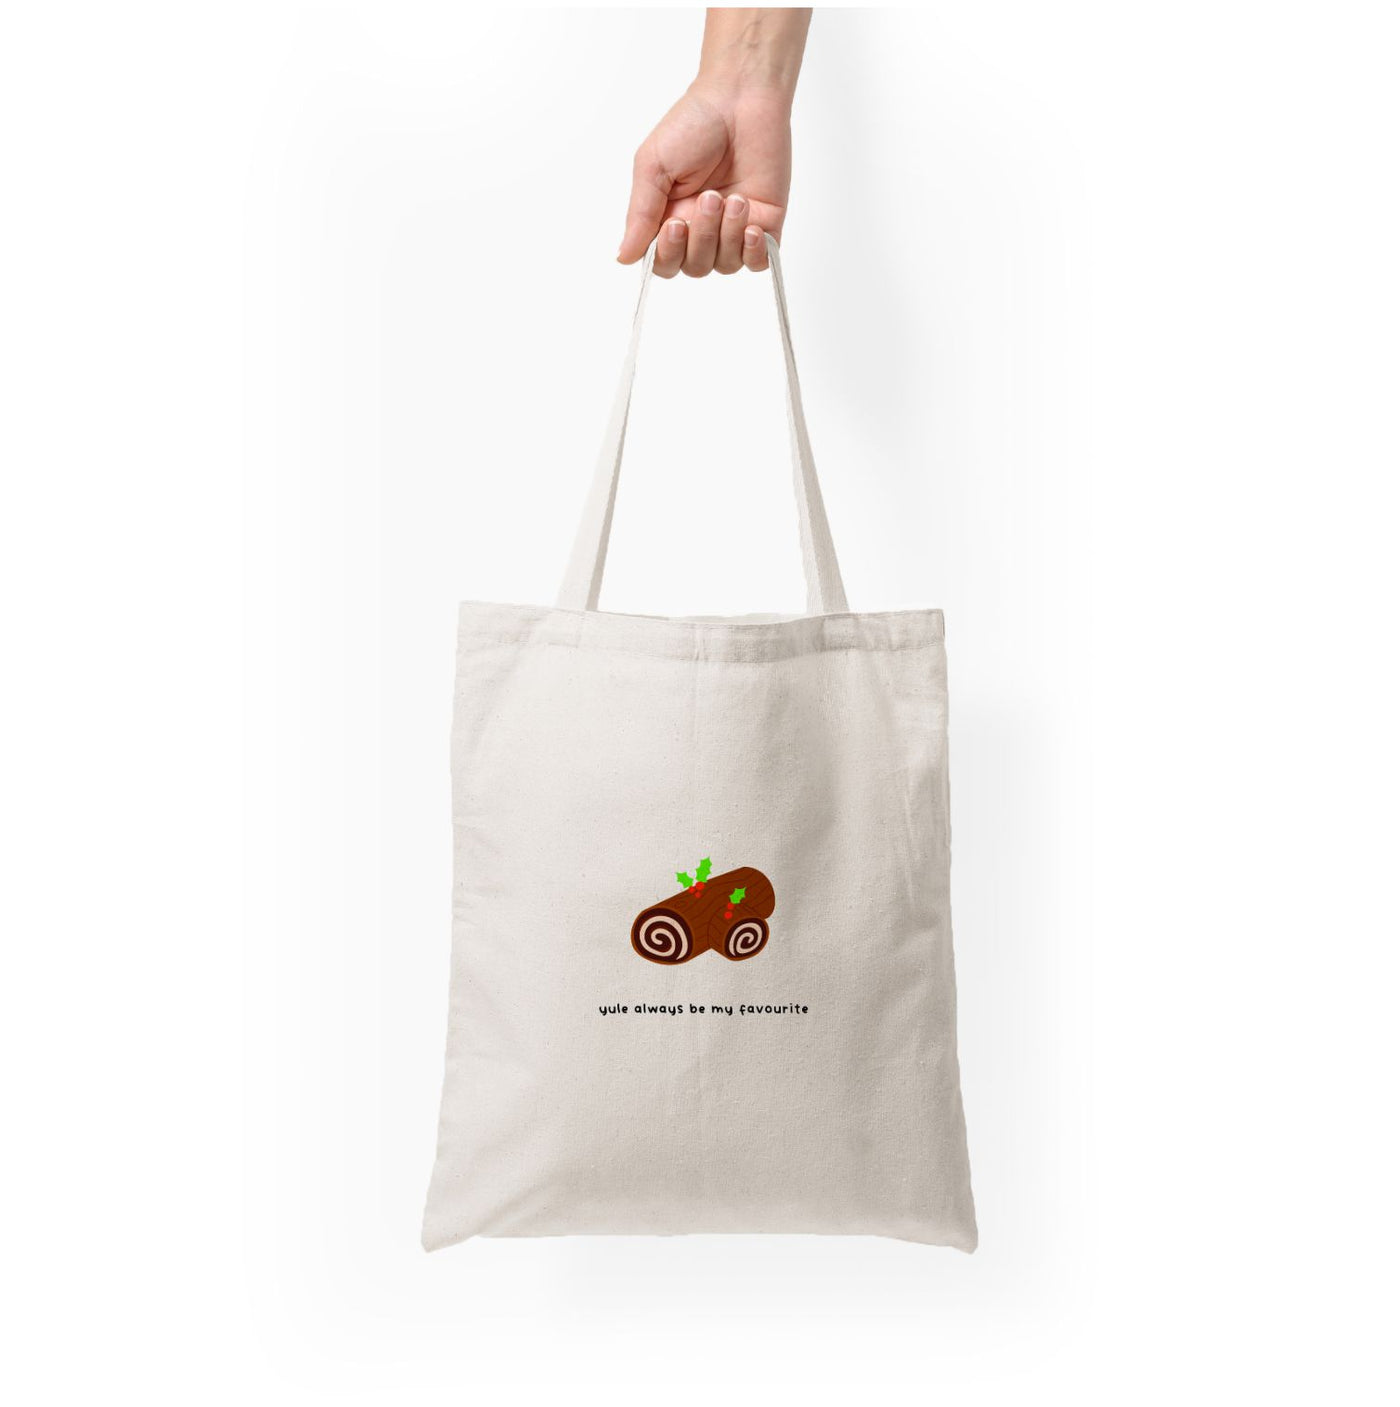 Yule Always Be My Favourite - Christmas  Tote Bag